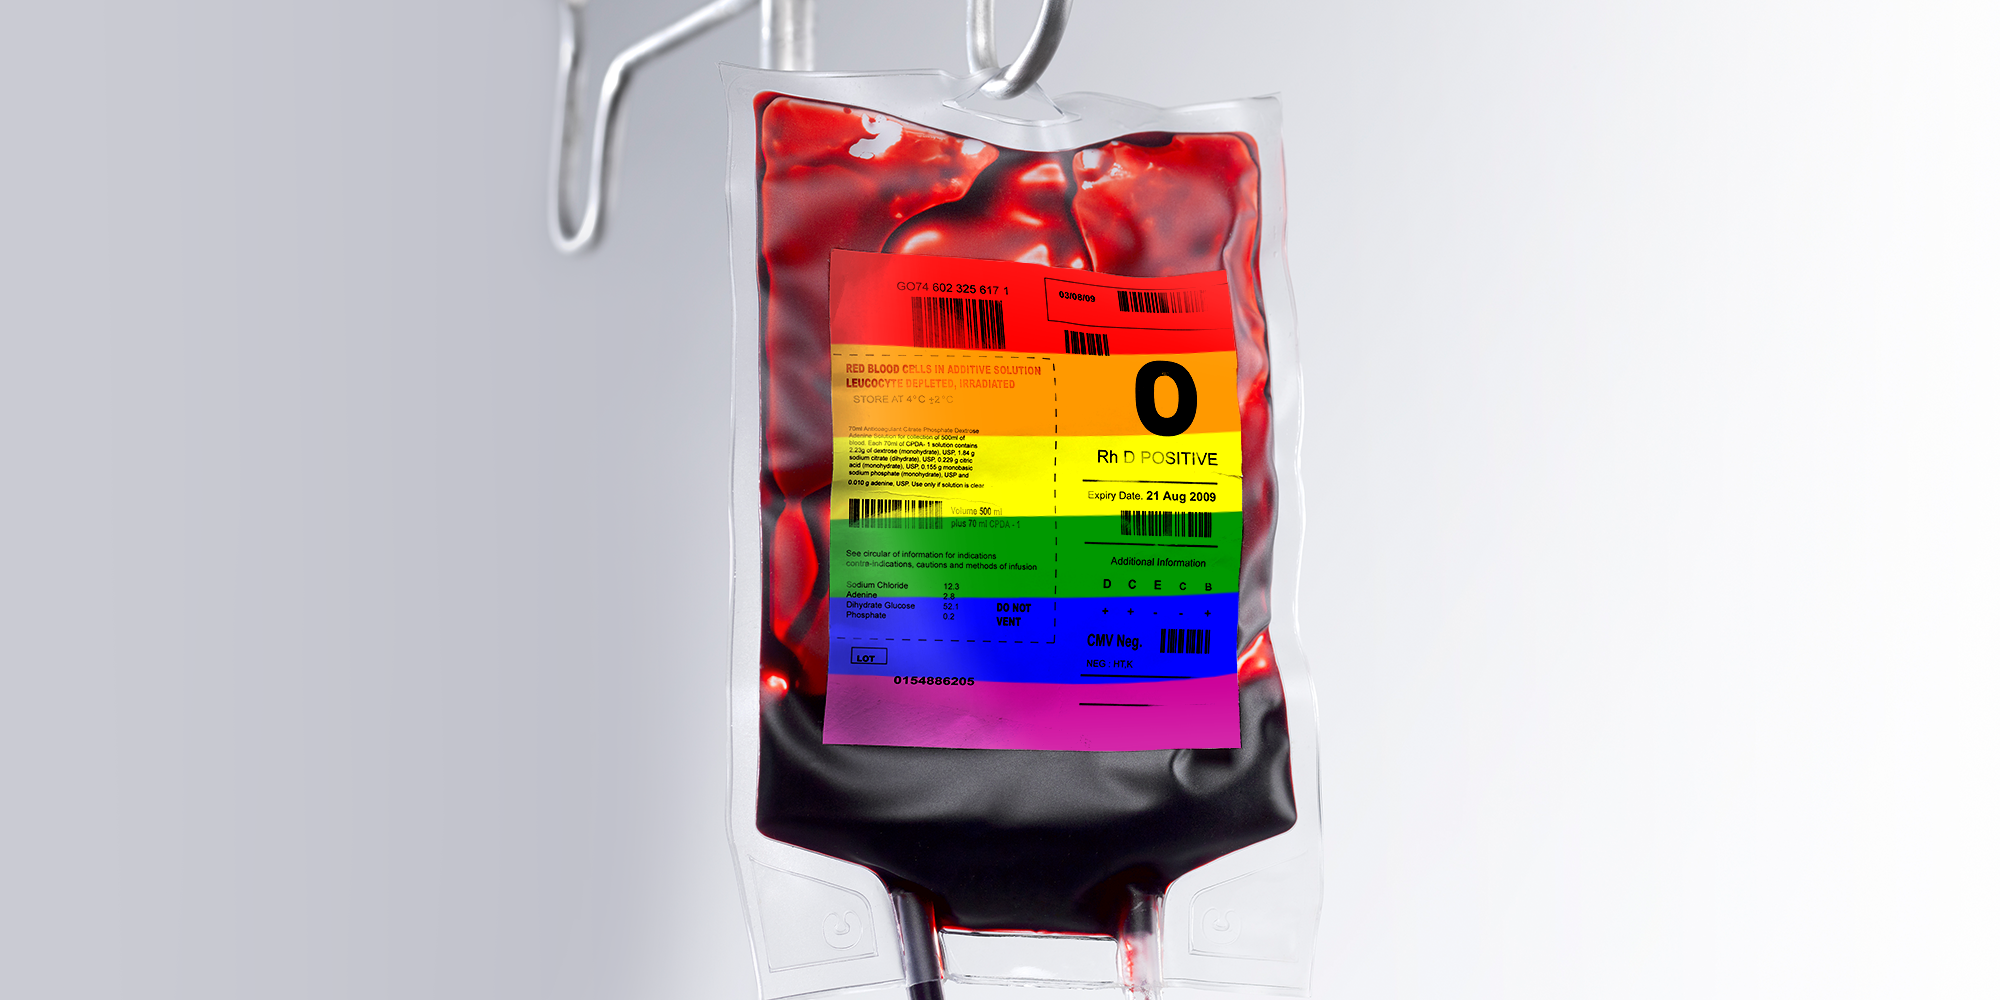 where can gay men donate blood